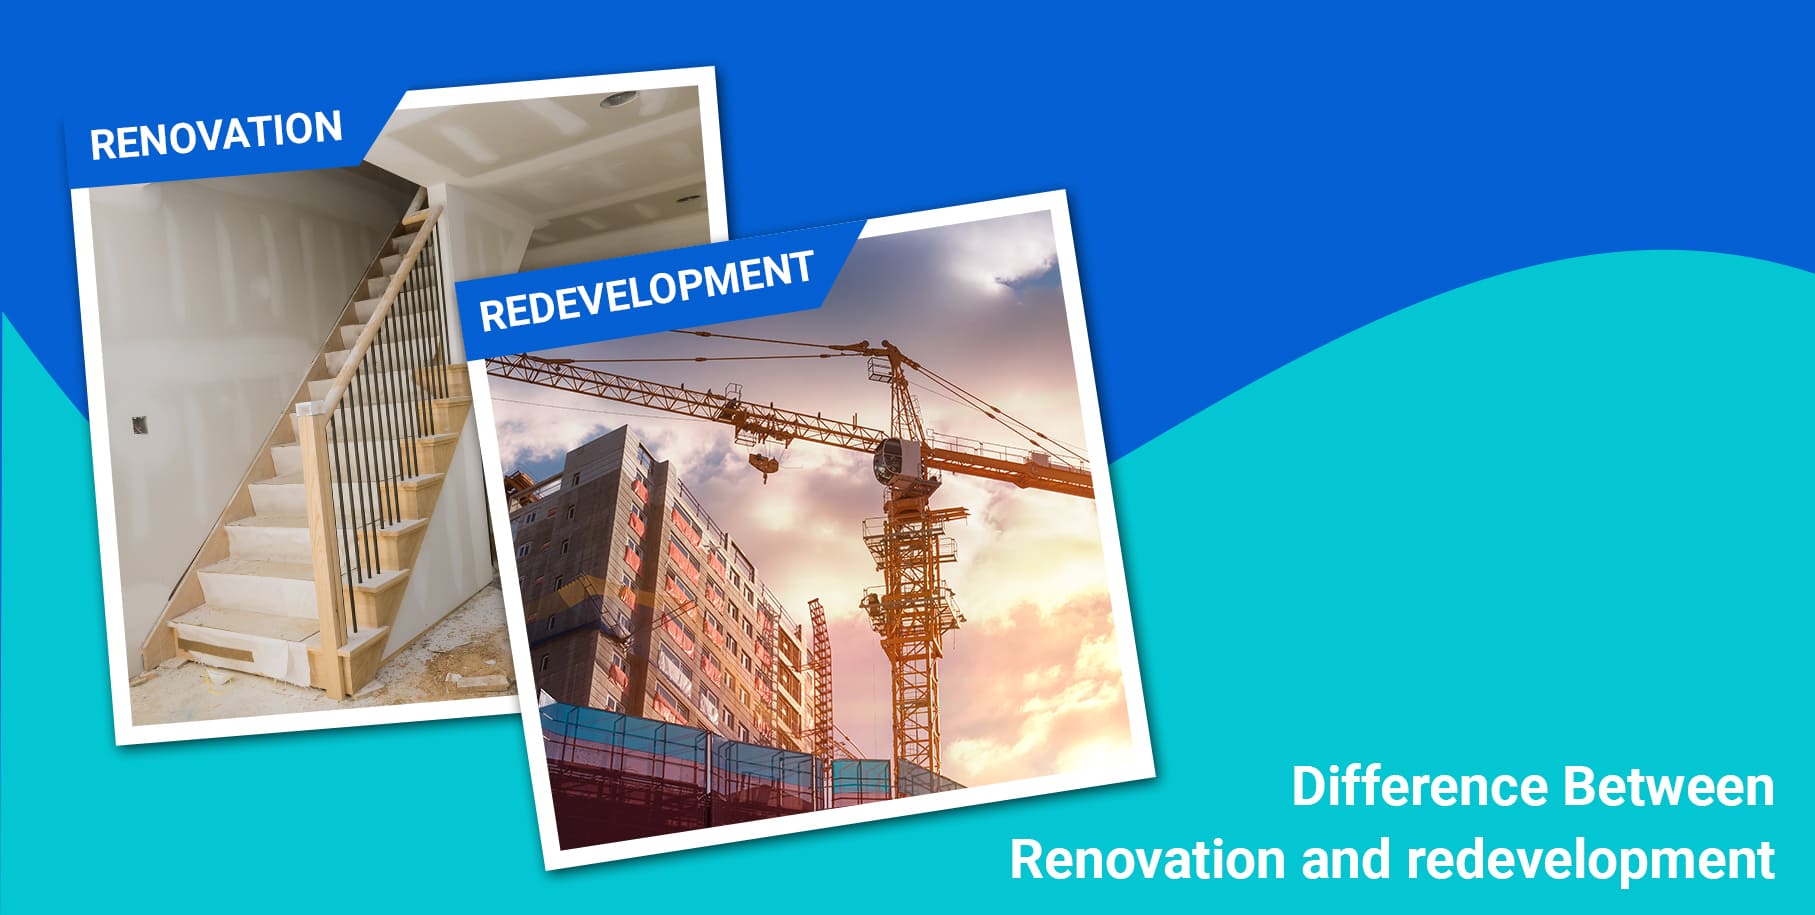 Difference between Renovation and Redevelopment